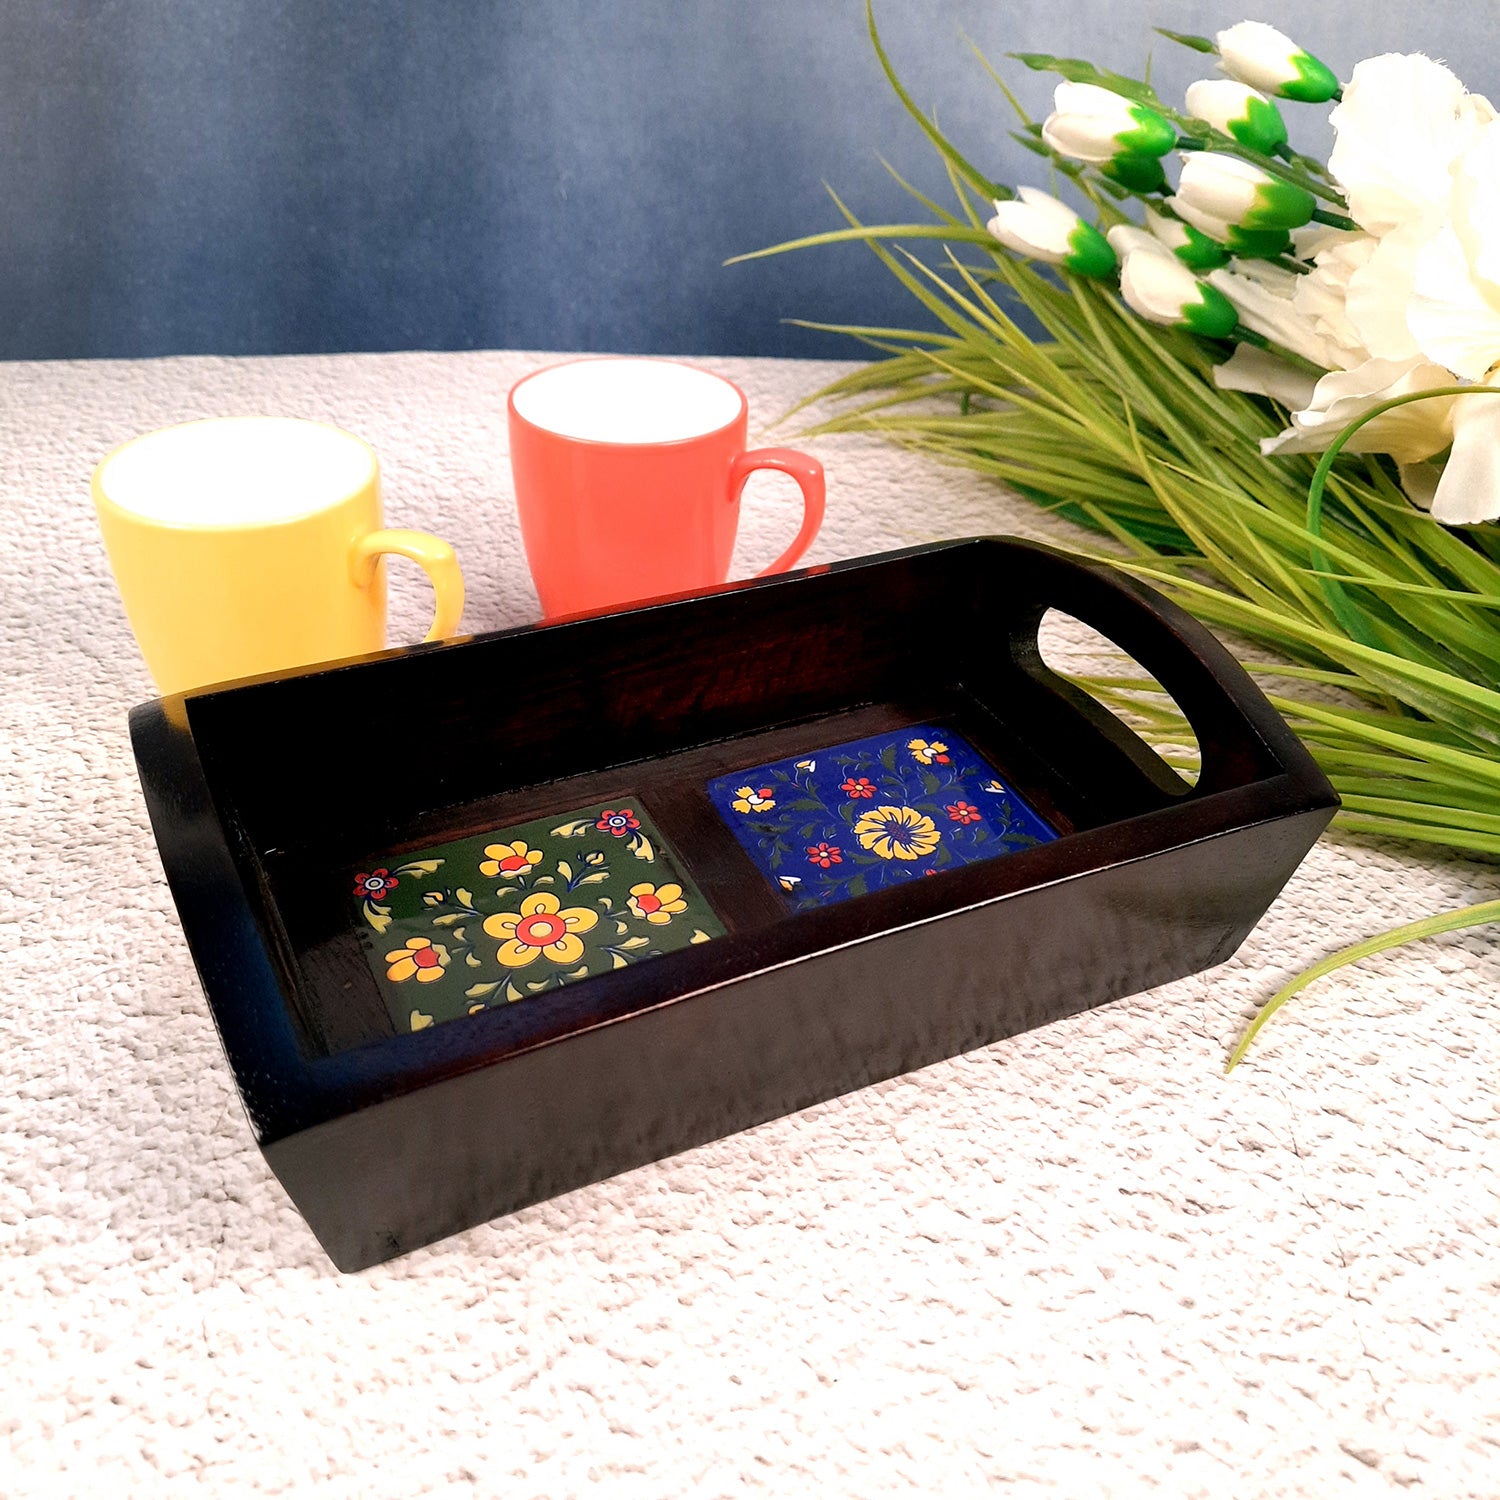 Serving Tray With Ceramic Tiles | Tea & Snacks Serving Platter Wooden - for Home, Dining Table, Kitchen Decor & Gifts - 9 Inch - Apkamart